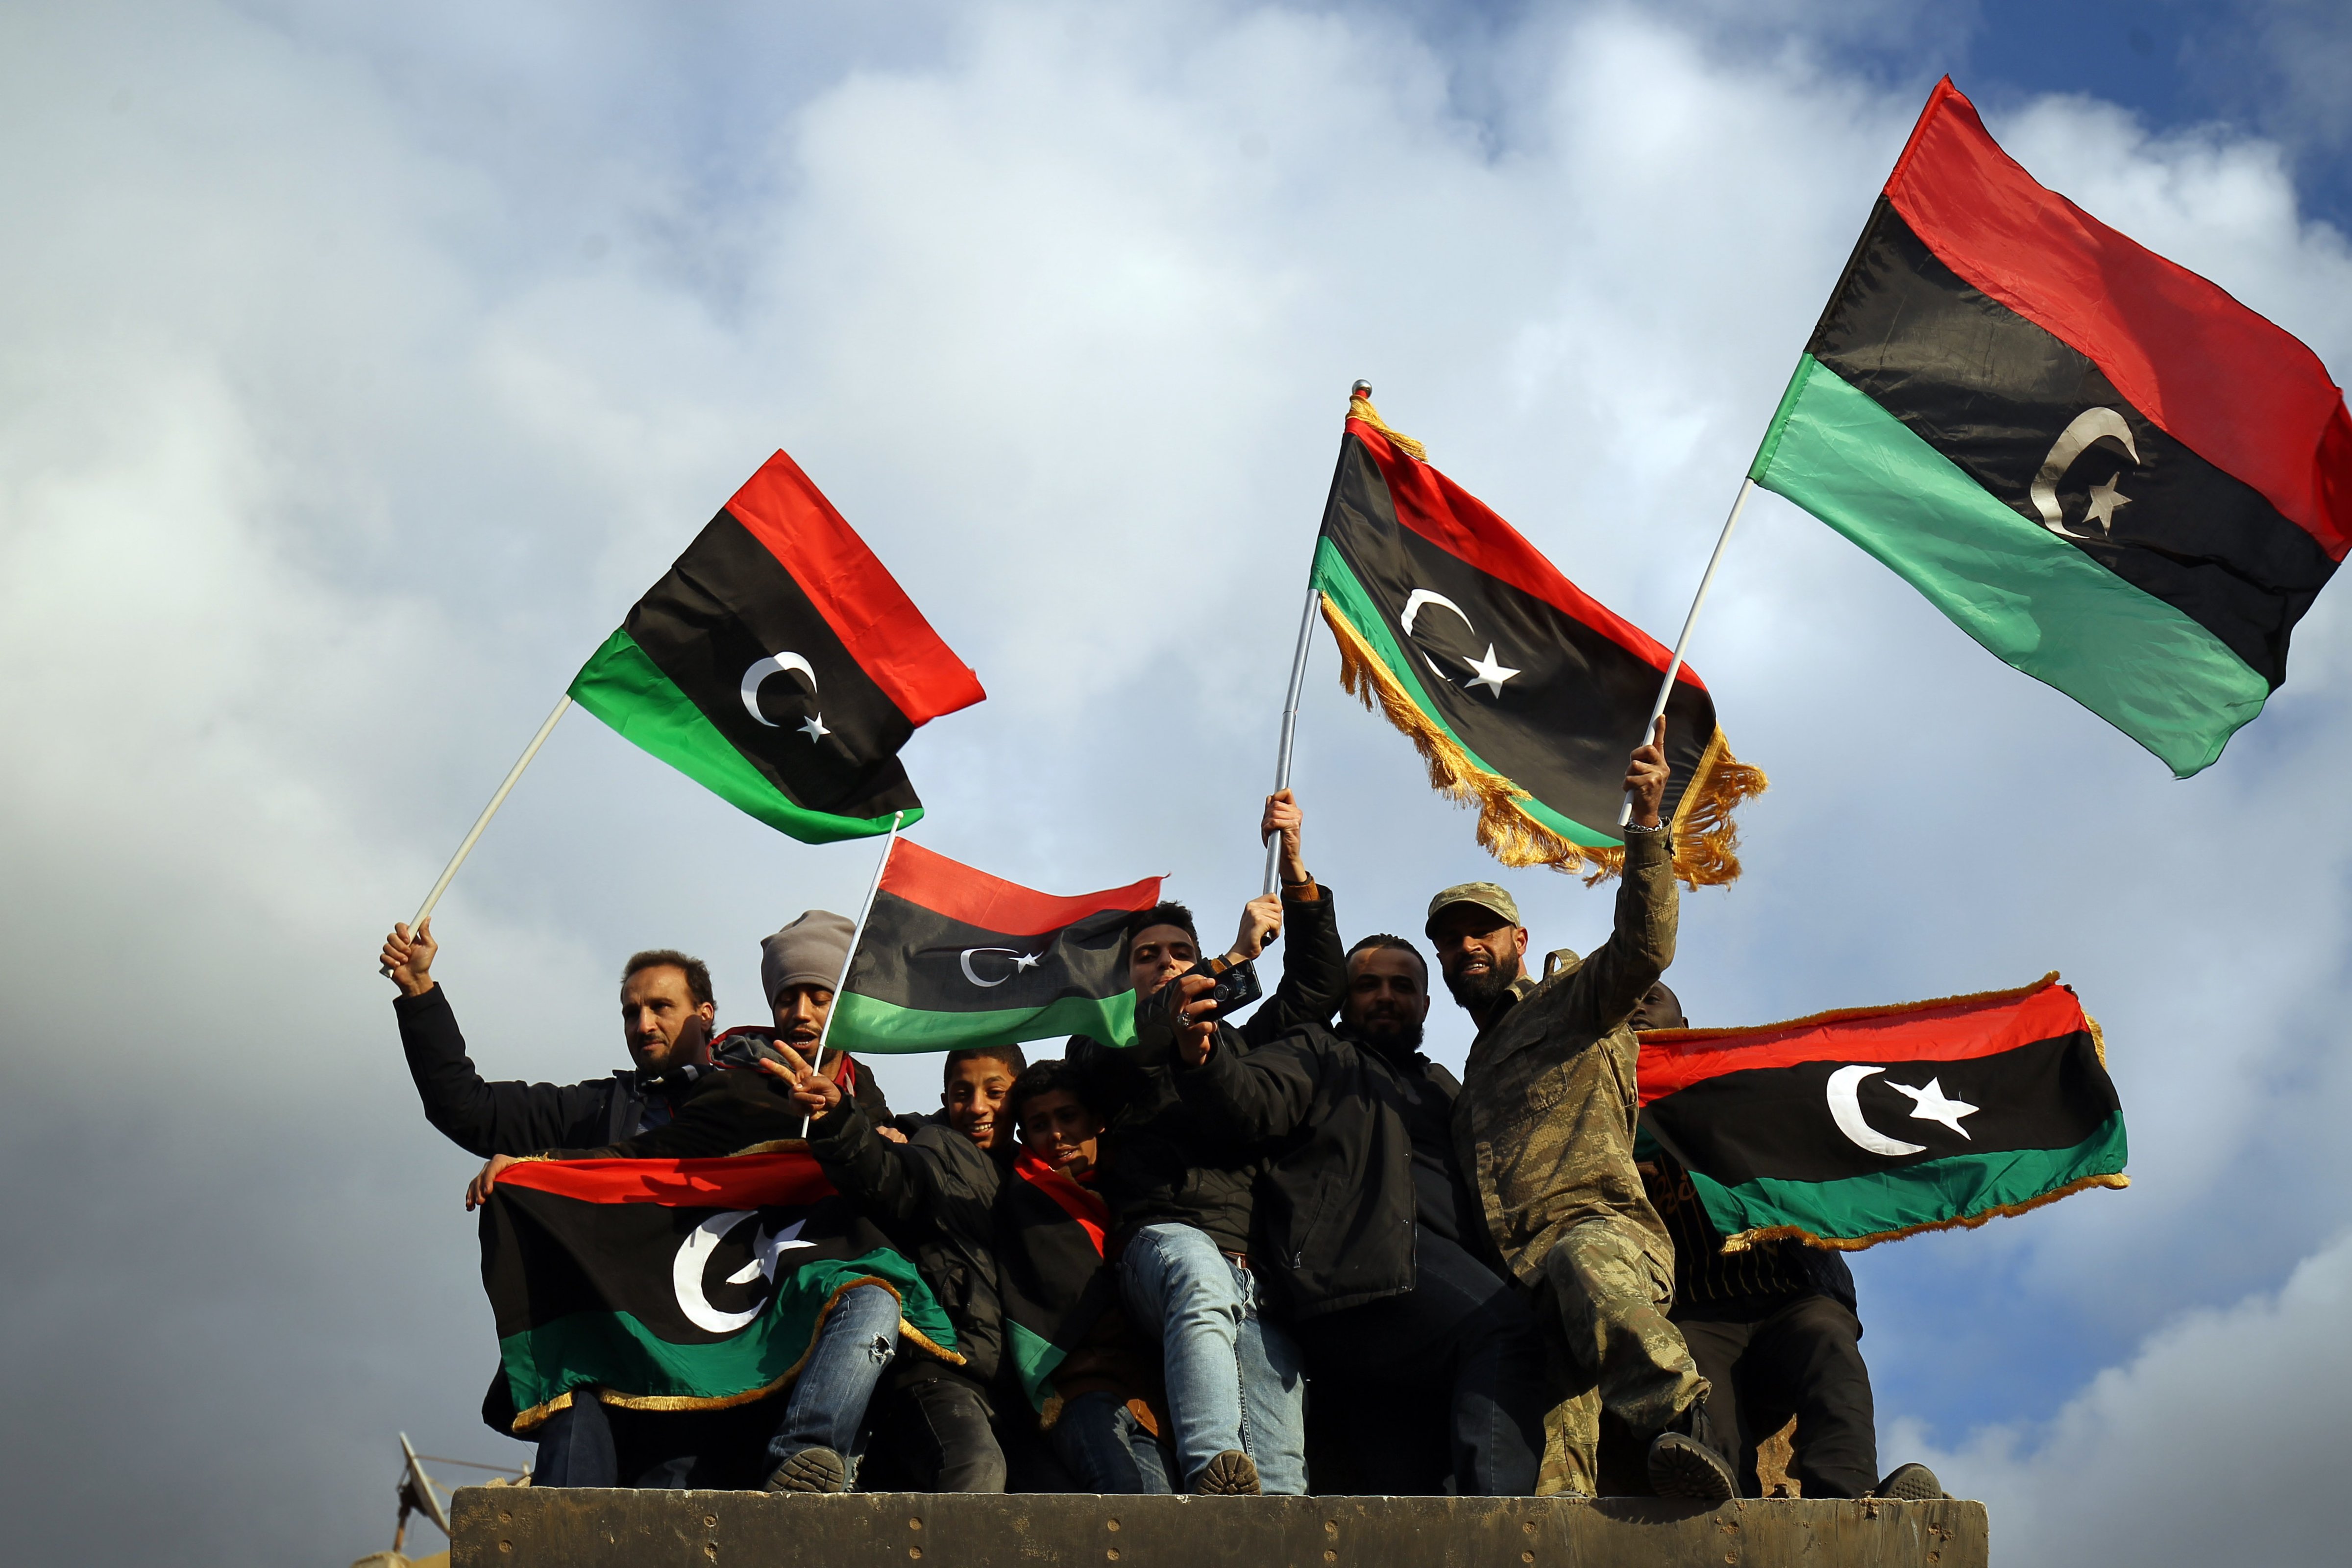 Libyans wave the national flag as they gather to mark the eighth anniversary of the uprising in Libya's second city of Benghazi, on February 17, 2019. (ABDULLAH DOMA&mdash;AFP/Getty Images)